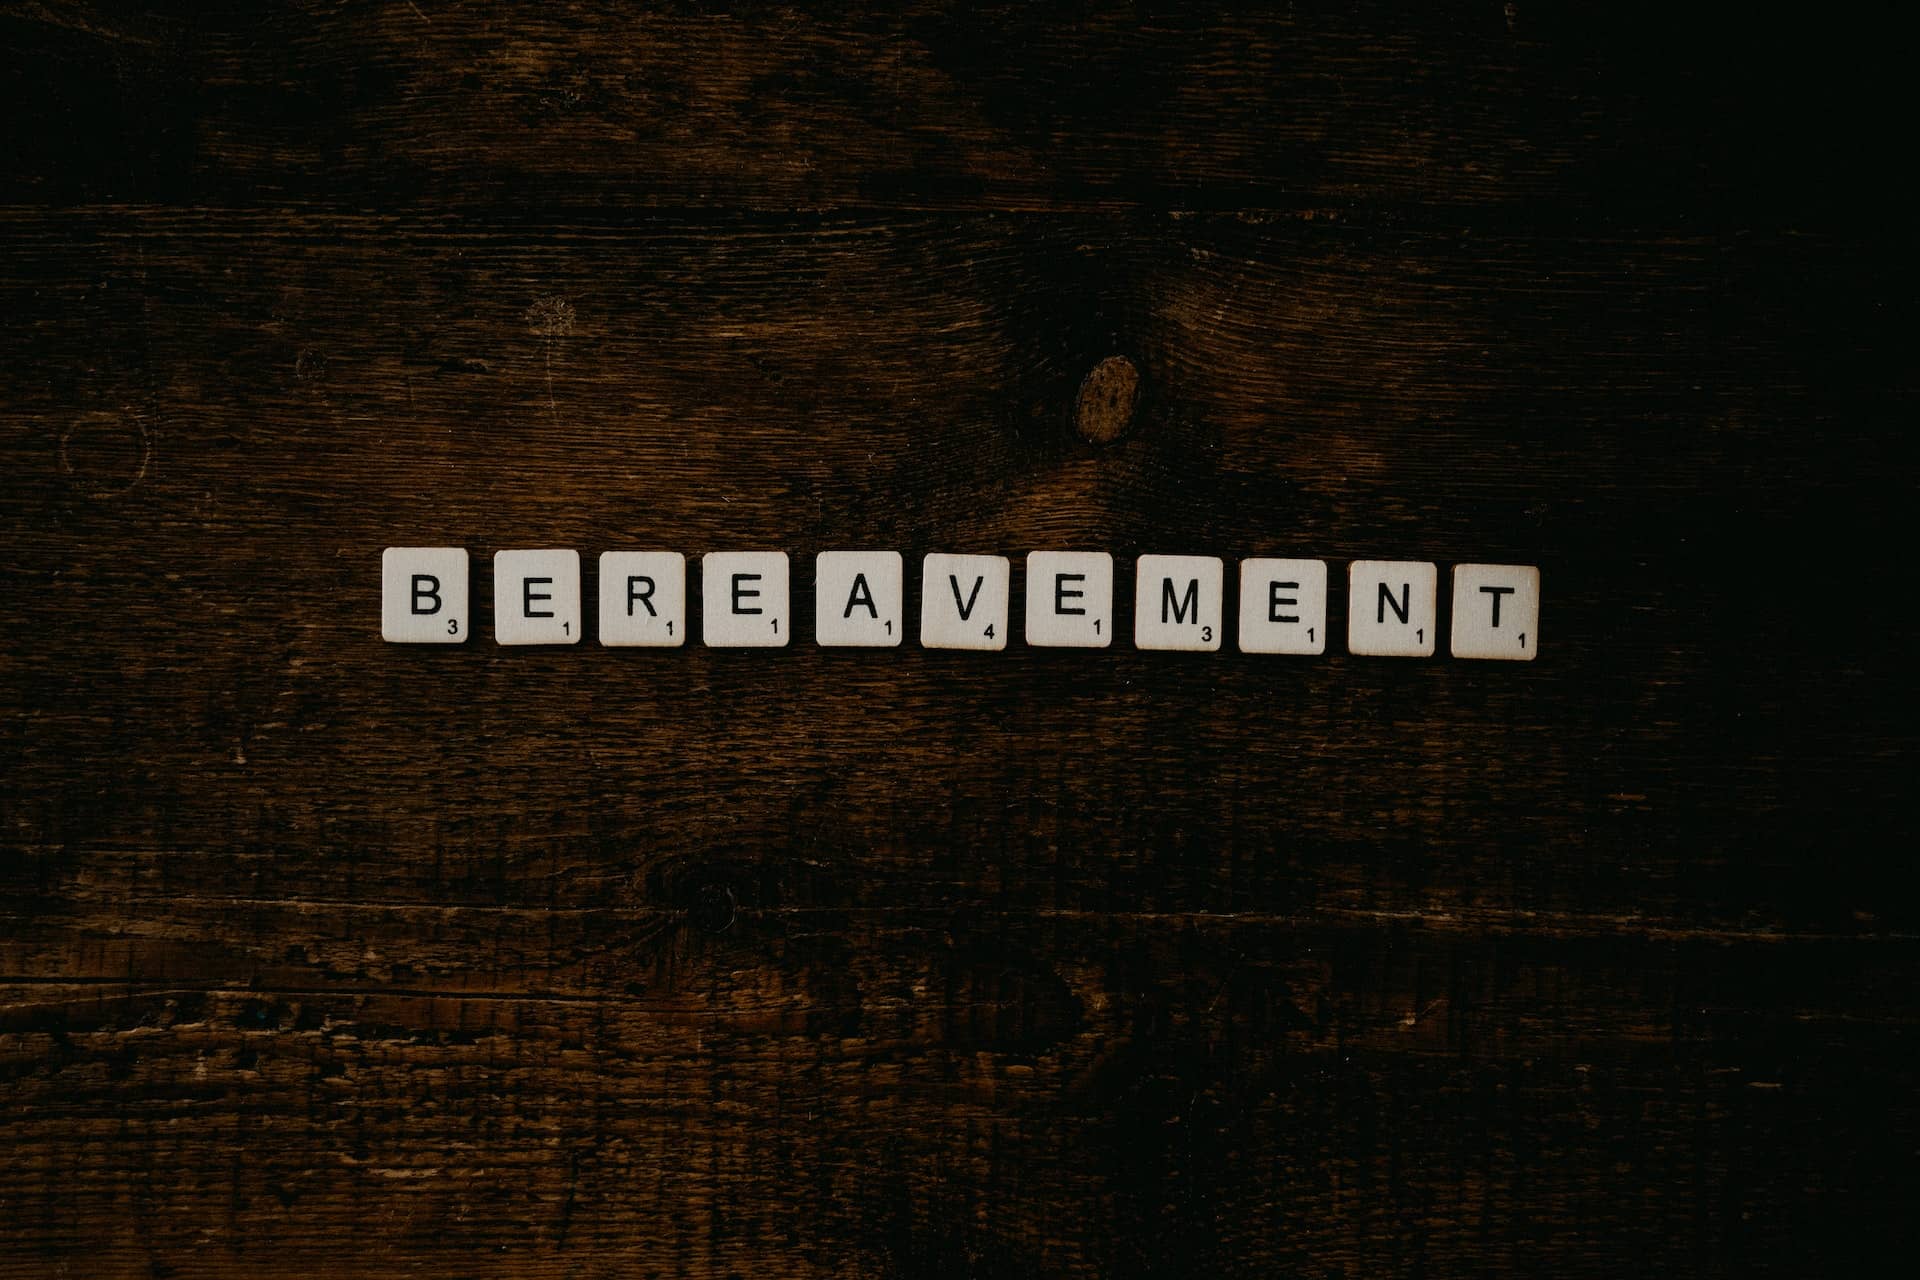 Letters on a table spelling out bereavement